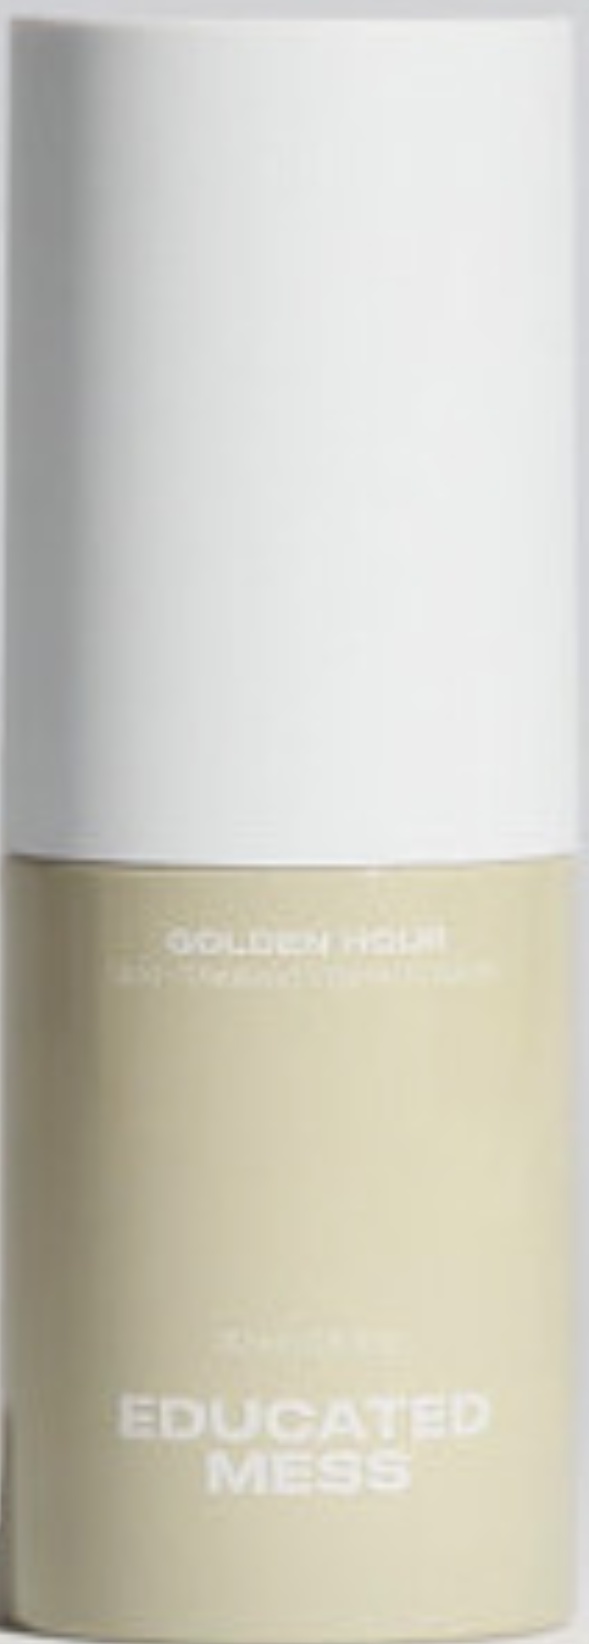 Educated Mess Golden Hour  Gold-stabilized  Vitamin C Serum